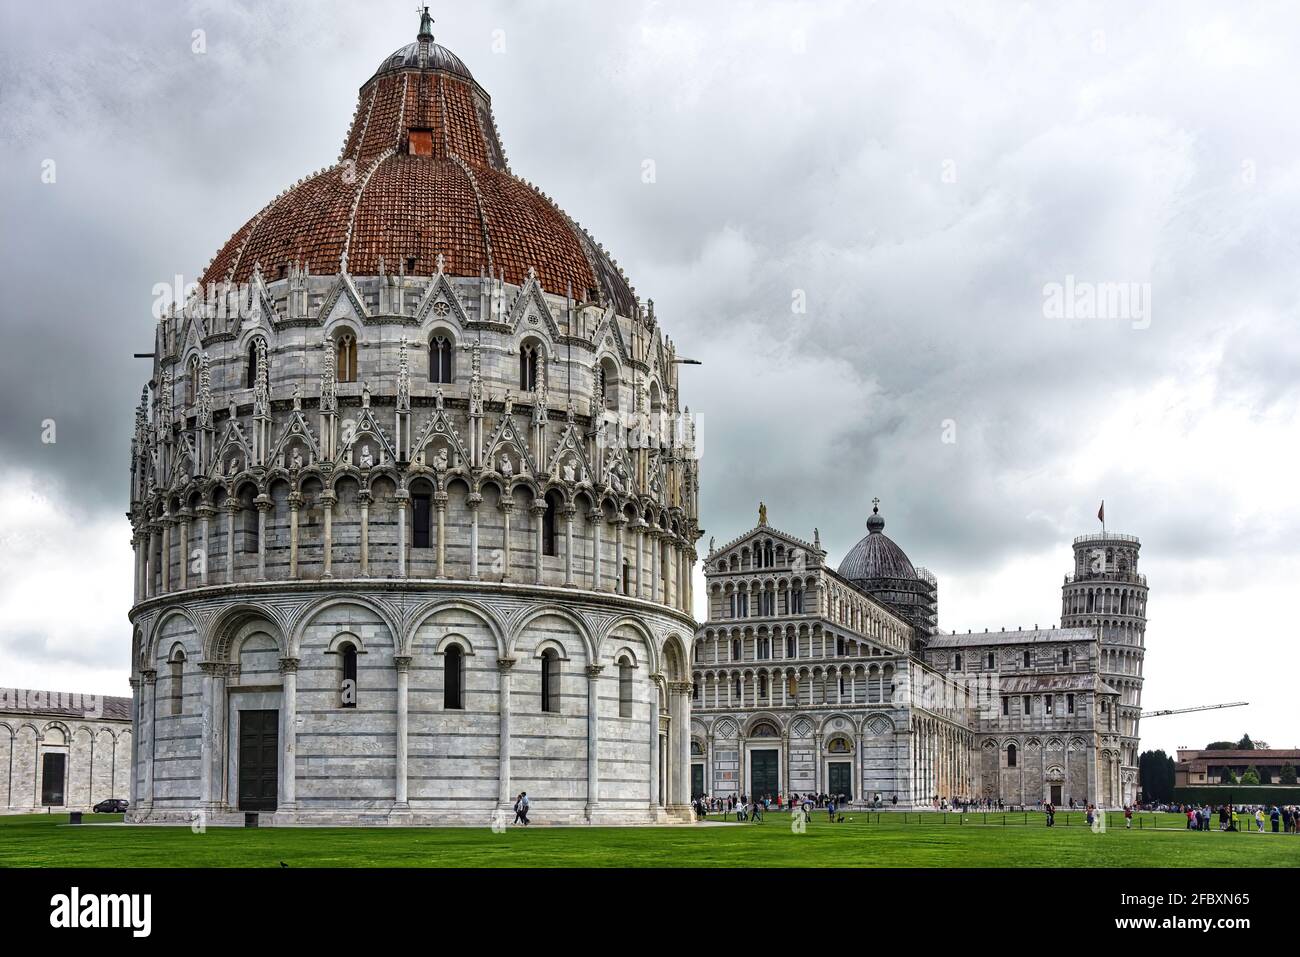 The Pisa Baptistery, the Pisa Cathedral and the Tower of Pisa located in the Piazza dei Miracoli (Square of Miracles) in Pisa, Italy. Stock Photo